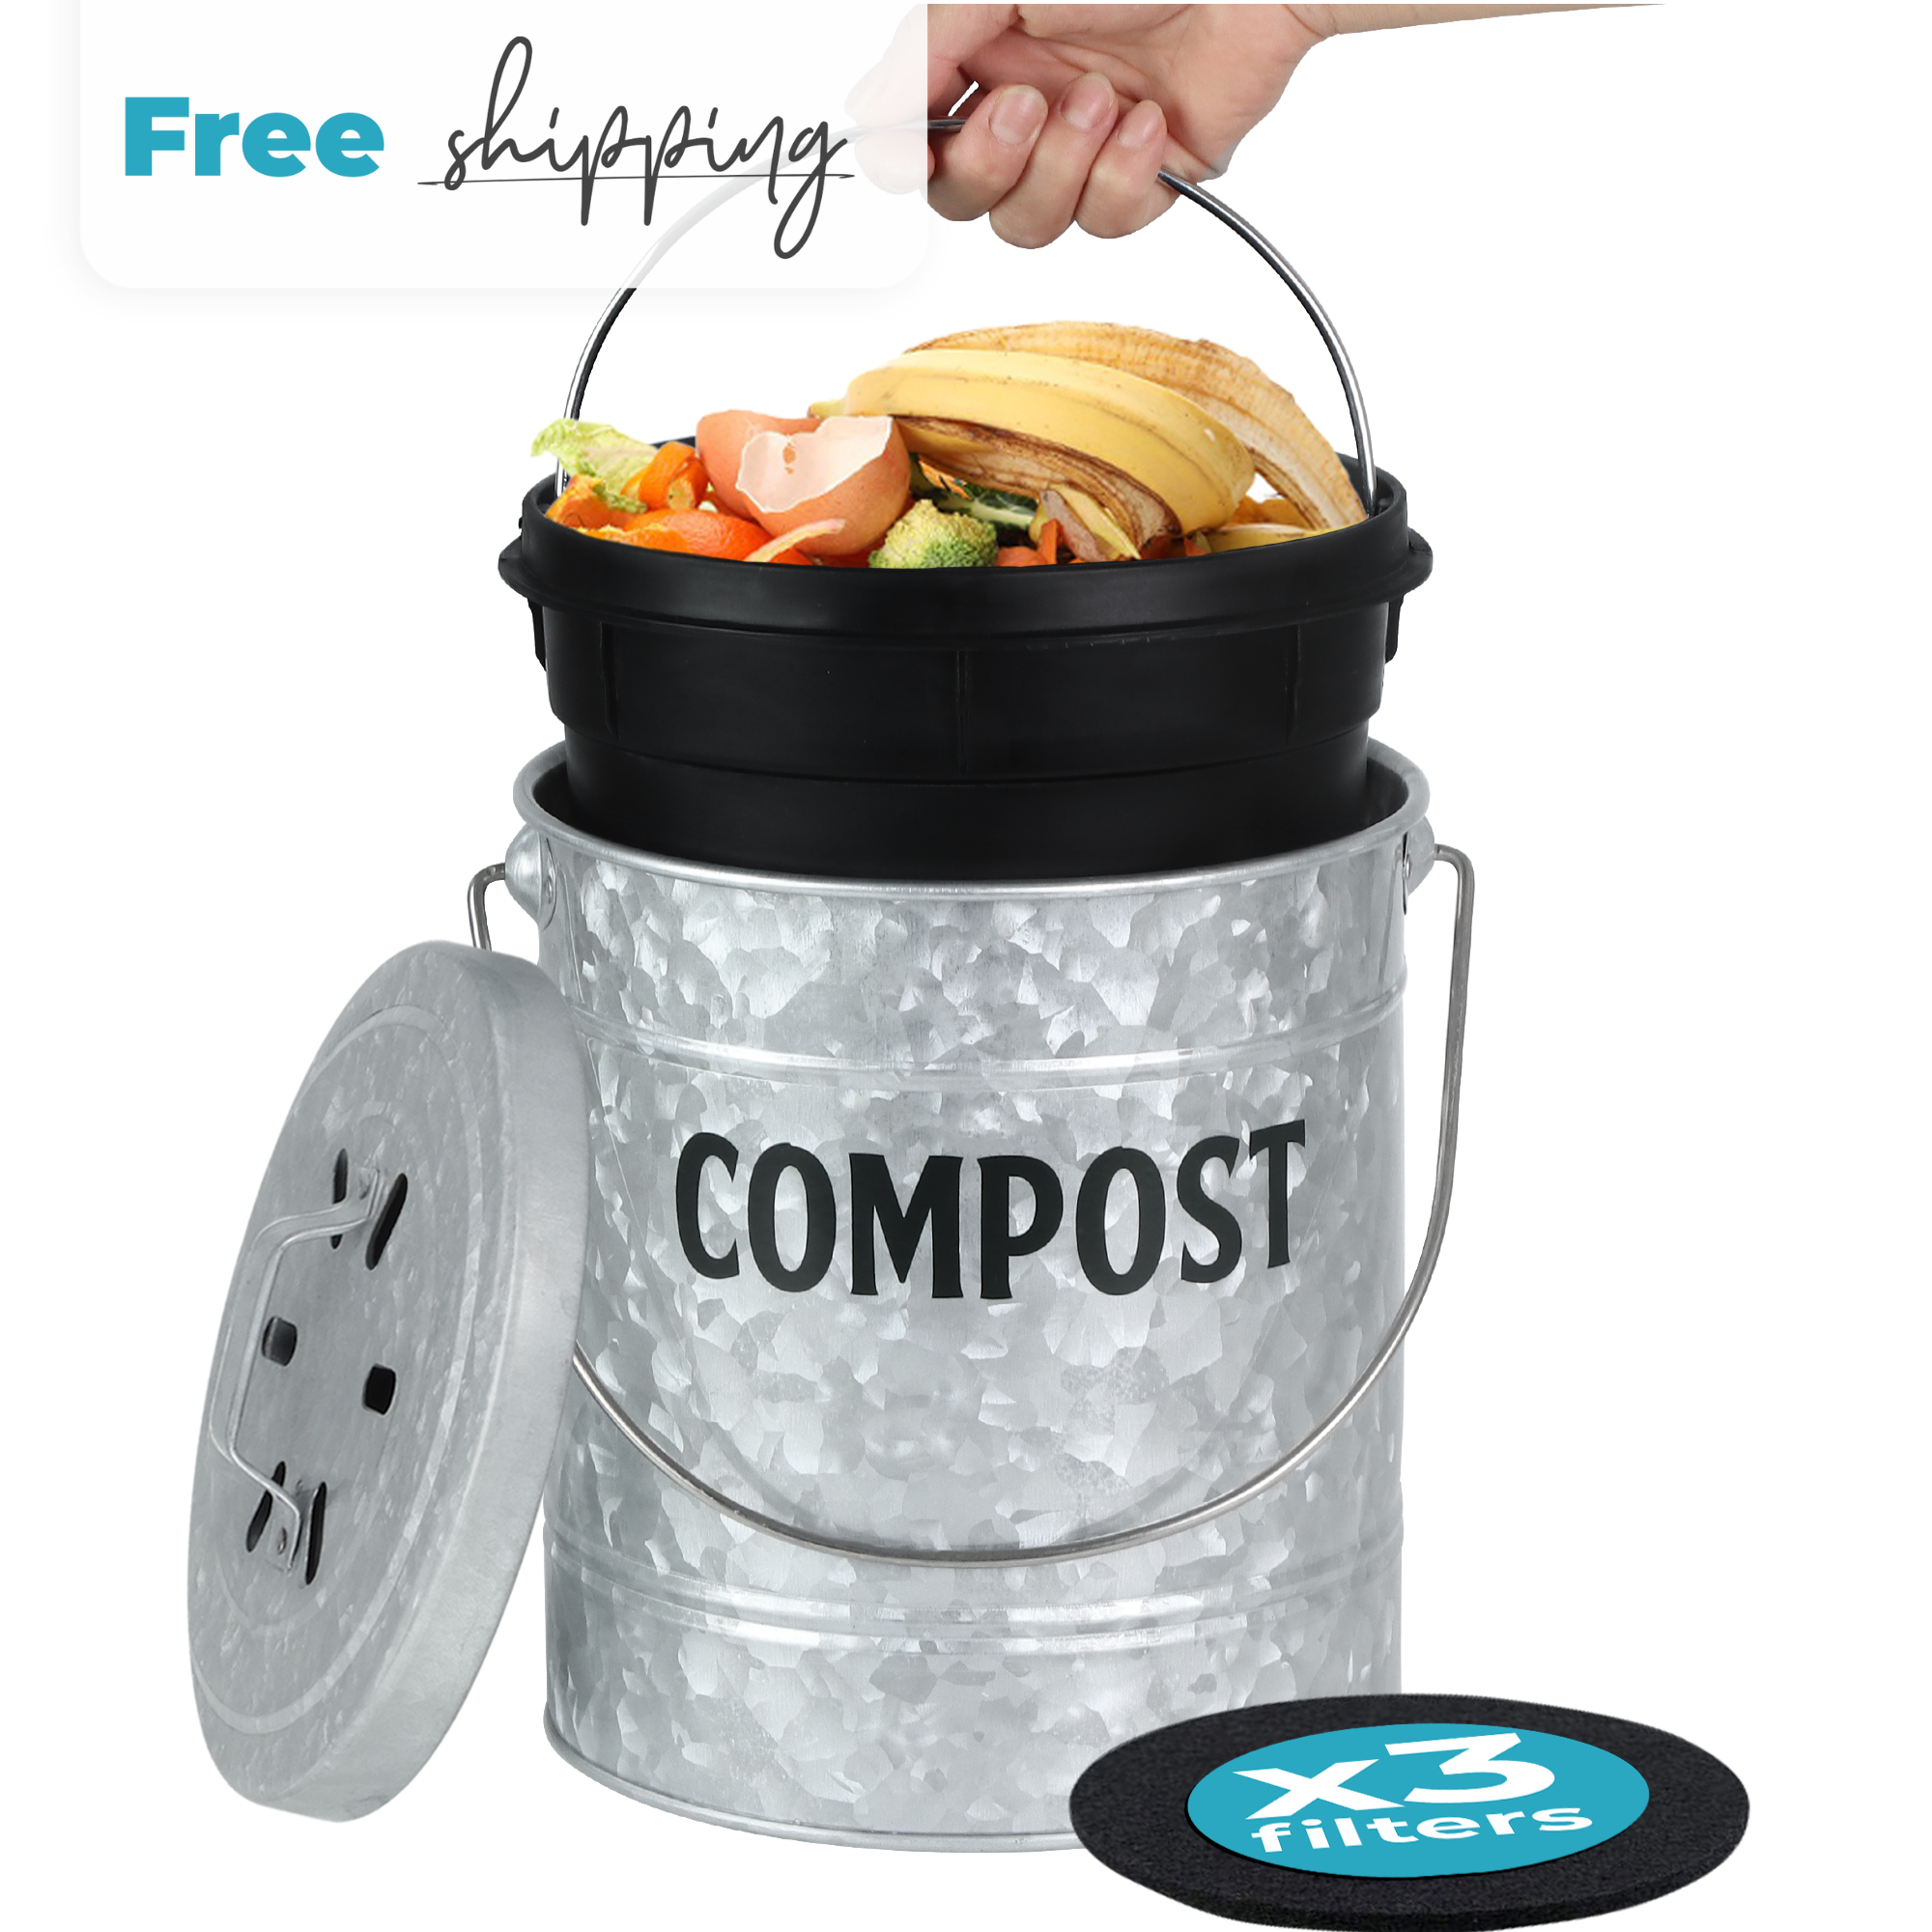 Galvanized Compost Bin by Saratoga Home with x3 filters